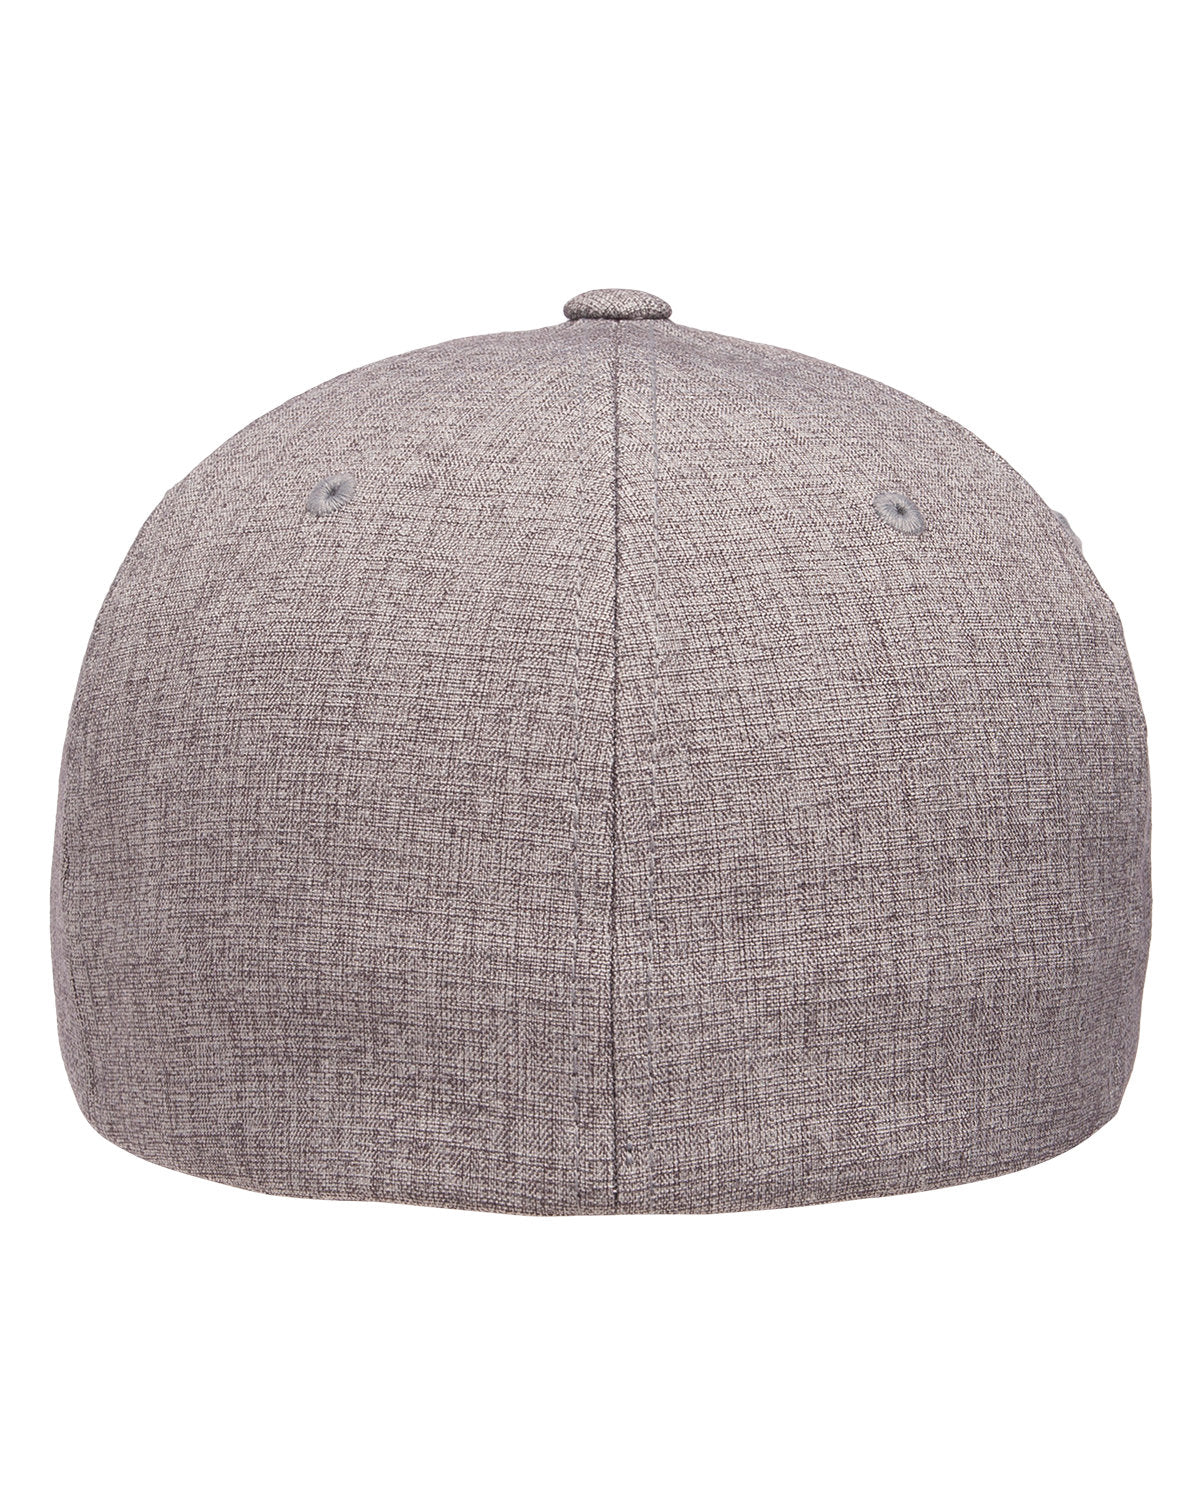 Sport grey feather light cap back view